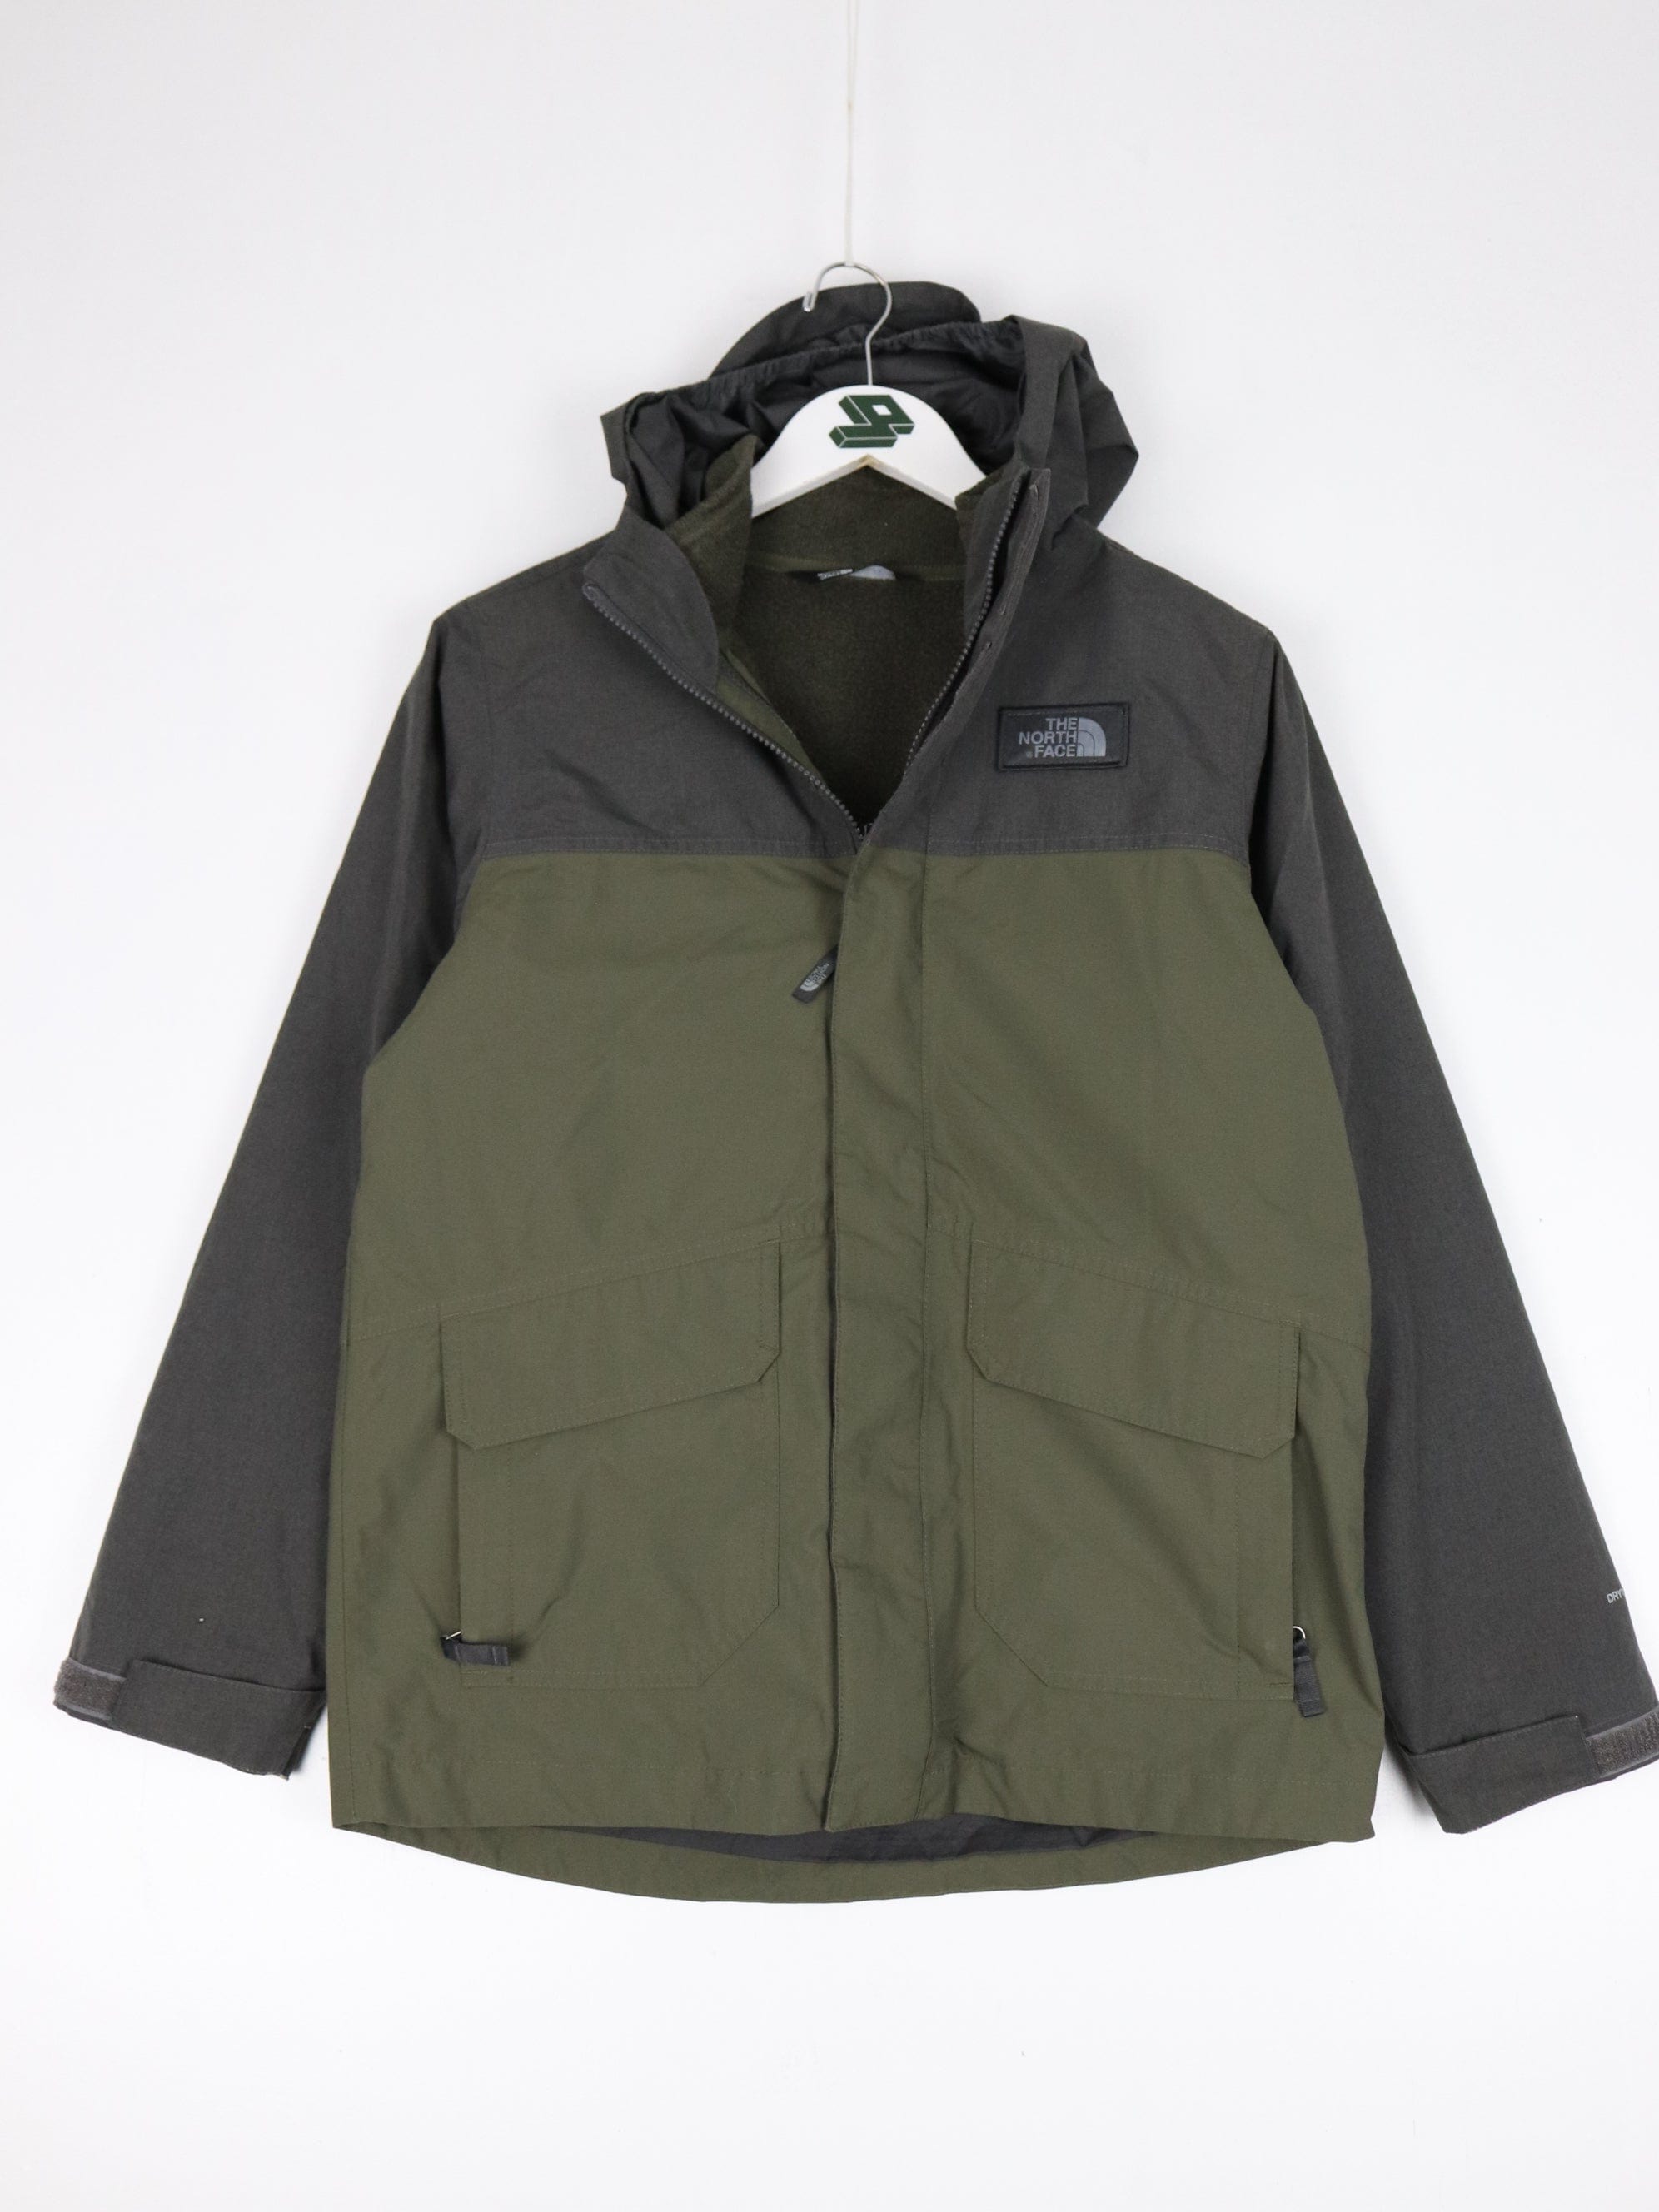 The North Face Jacket Youth L Green Dryvent Outdoors Lined Coat